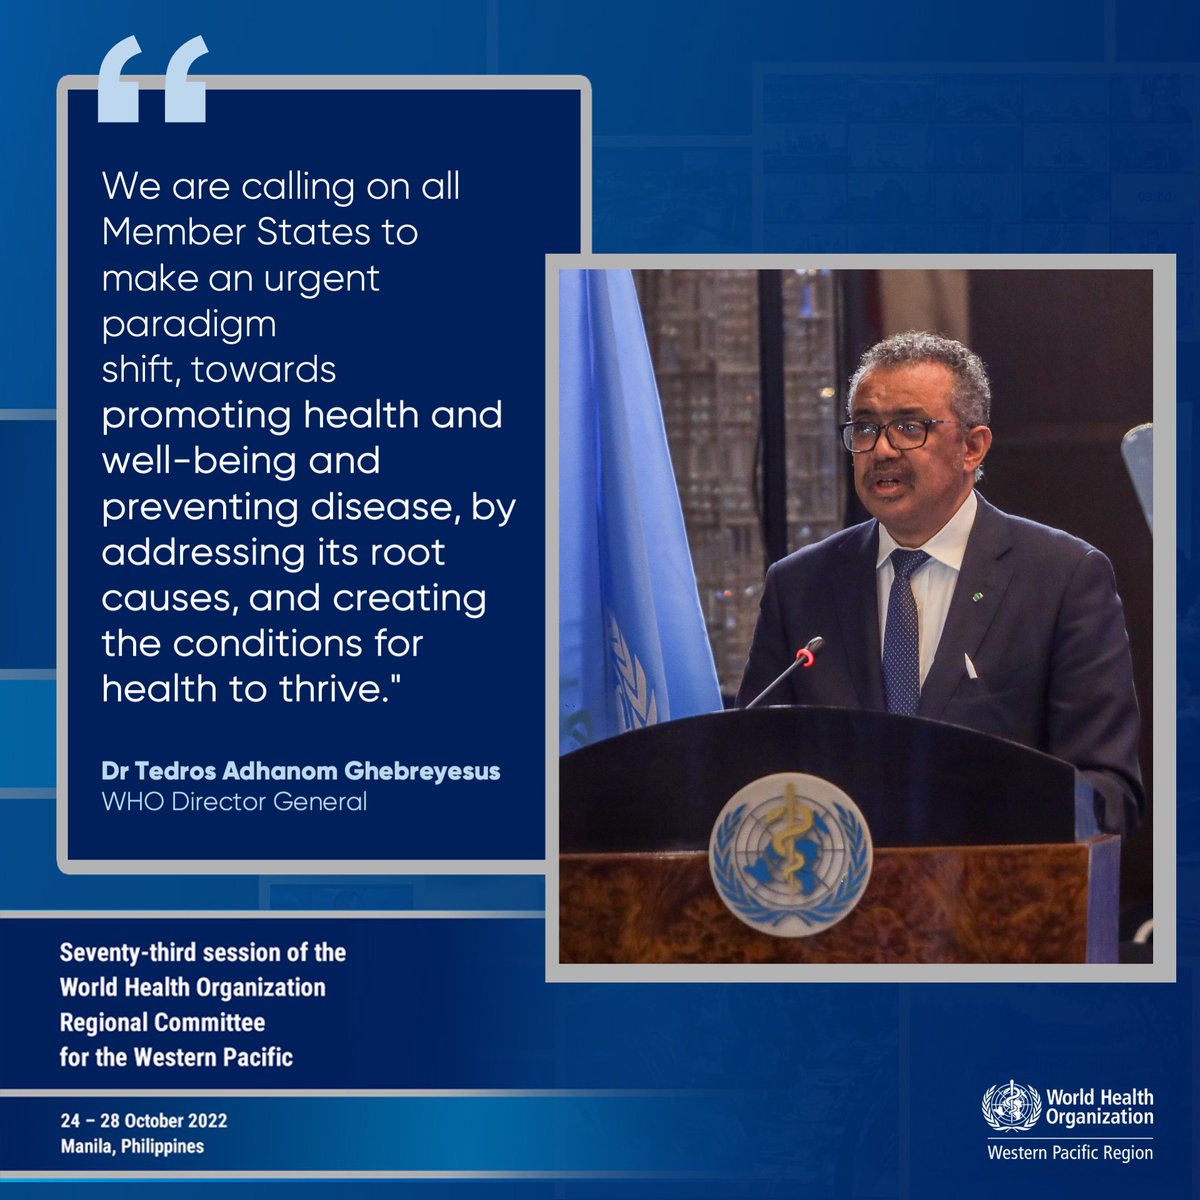 'Realising our vision for the highest attainable standard of health starts not in the clinic or the hospital, but in schools, streets, supermarkets, households and cities, and especially in our homes.' - @DrTedros, WHO Director-General #RCM73